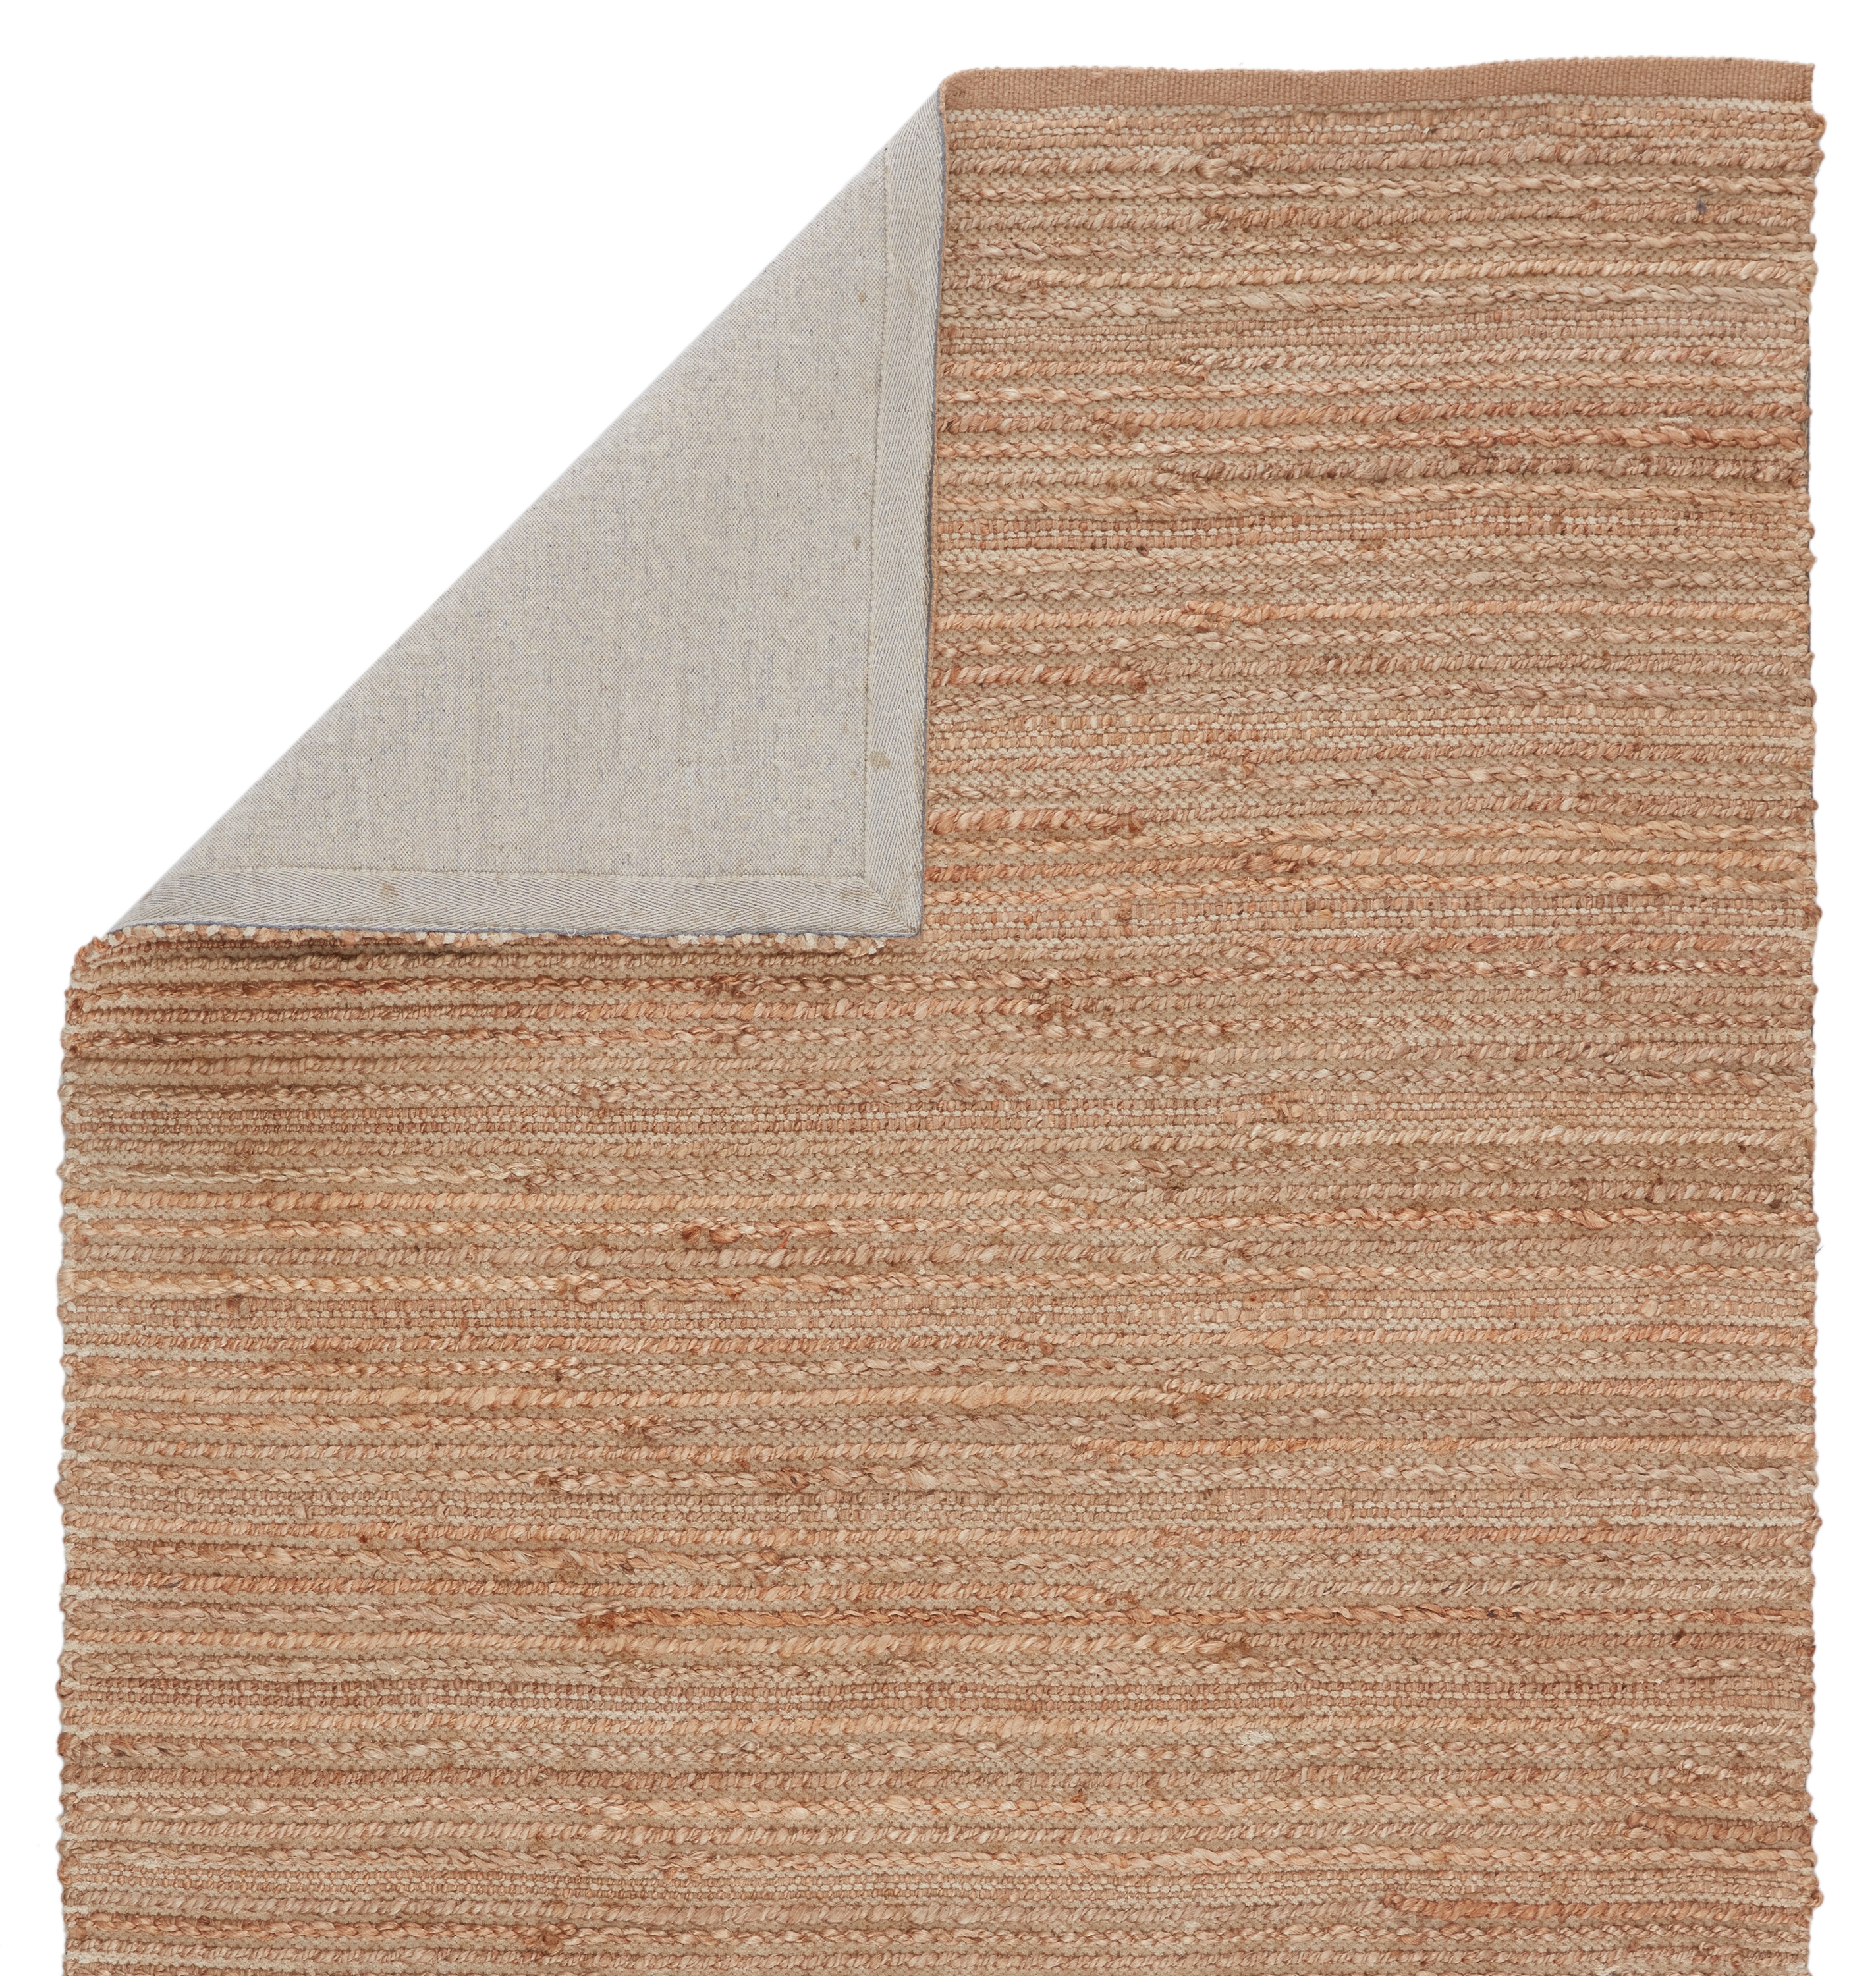 Clifton Natural Solid Tan/ White Runner Rug (2'6" X 9') - Image 2